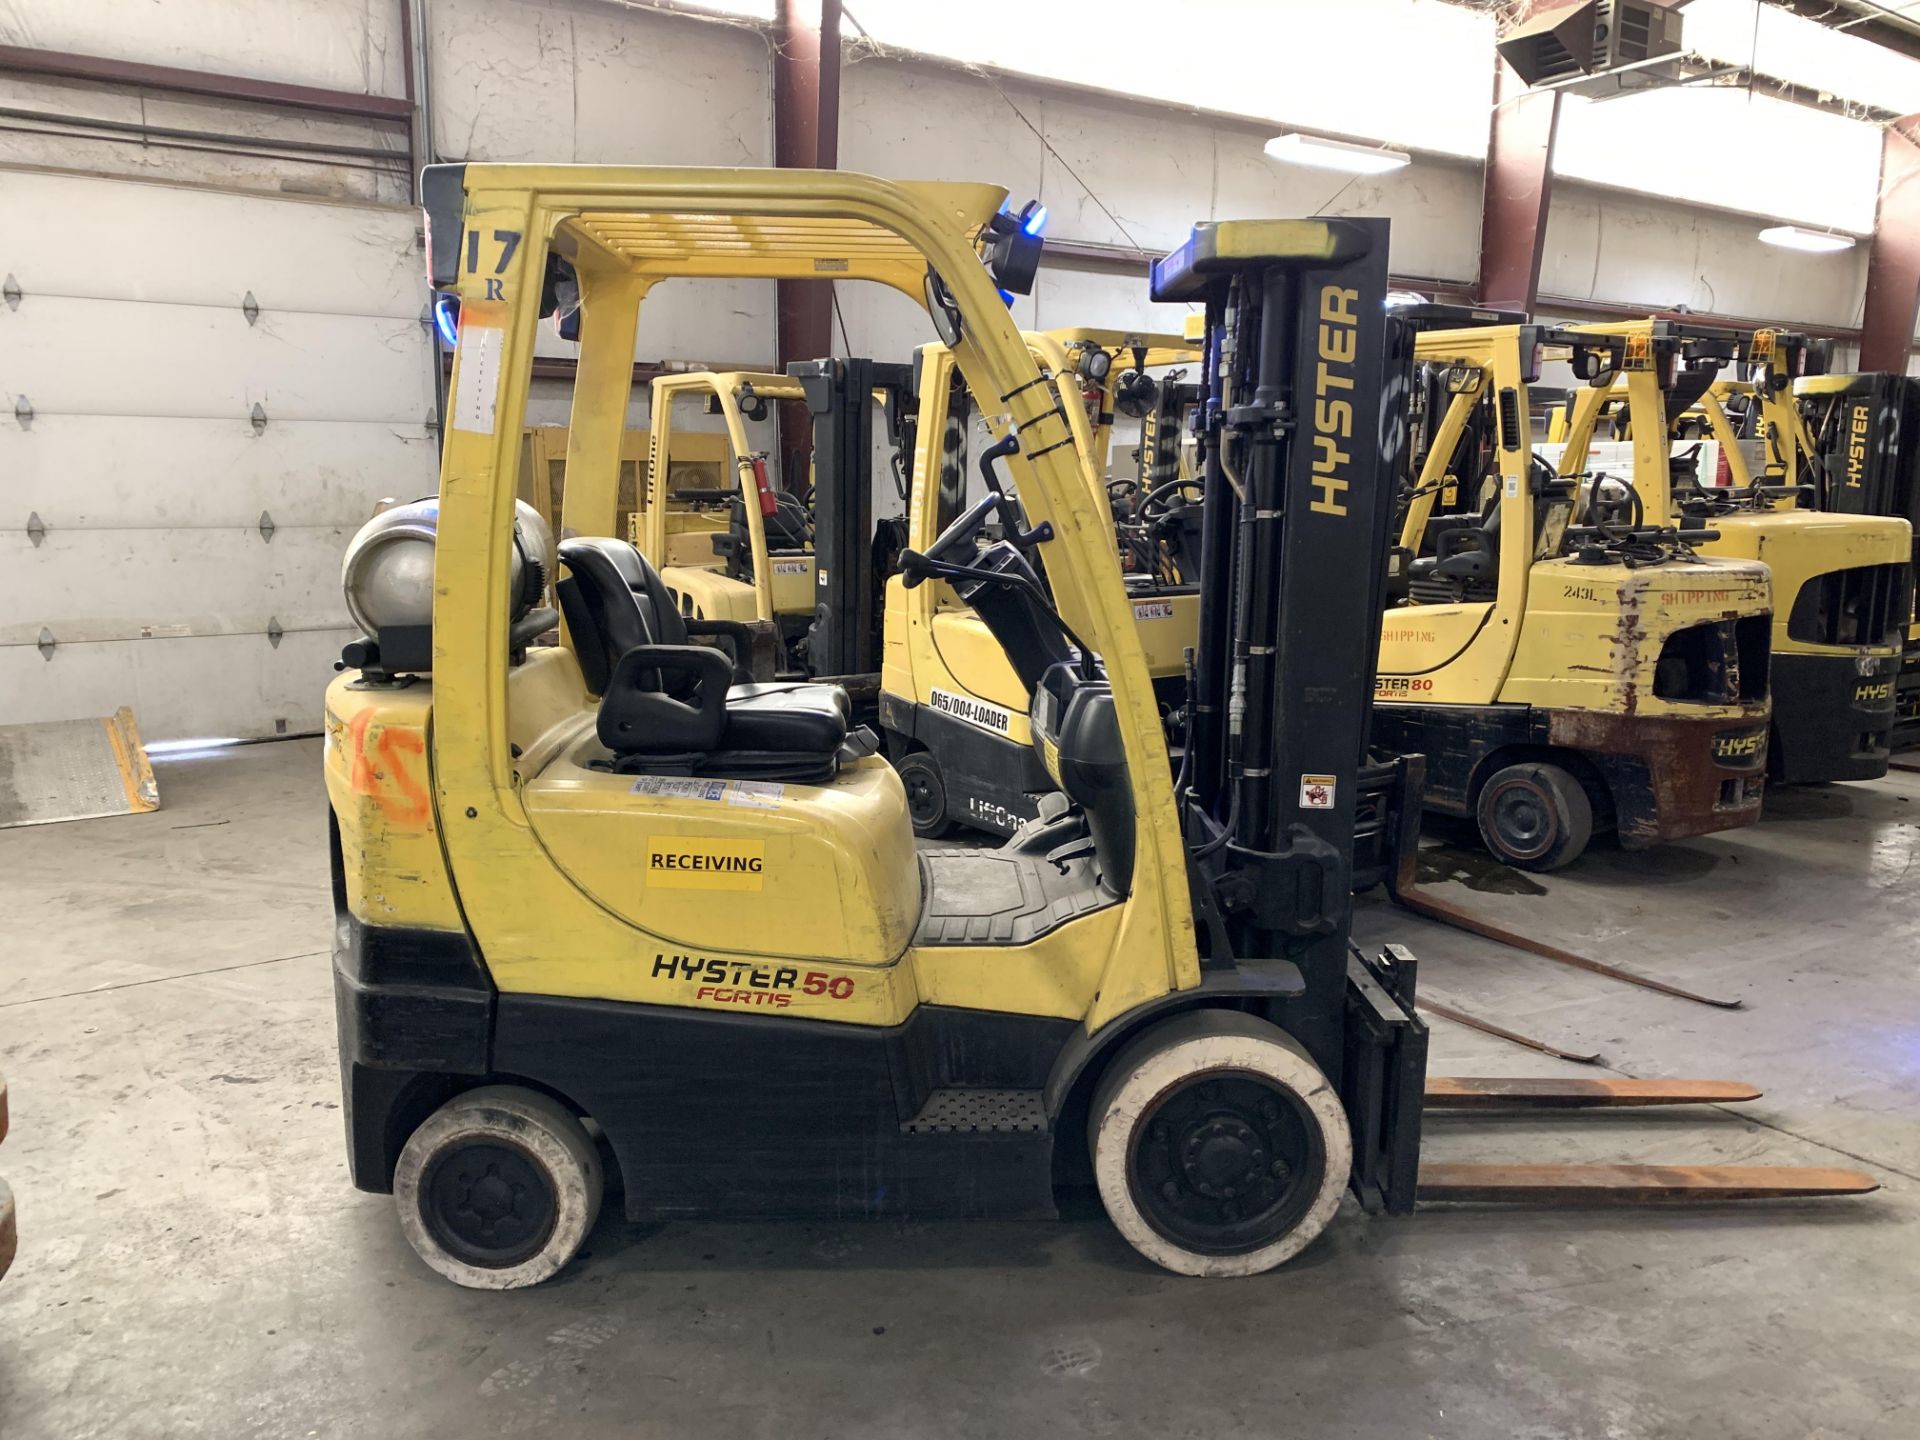 * LOCATED IN OH* 2013 HYSTER 5,000-LB FORKLIFT, MOD: S50FT, LPG, SOLID TIRES, 3-STAGE MAST SIDESHIFT